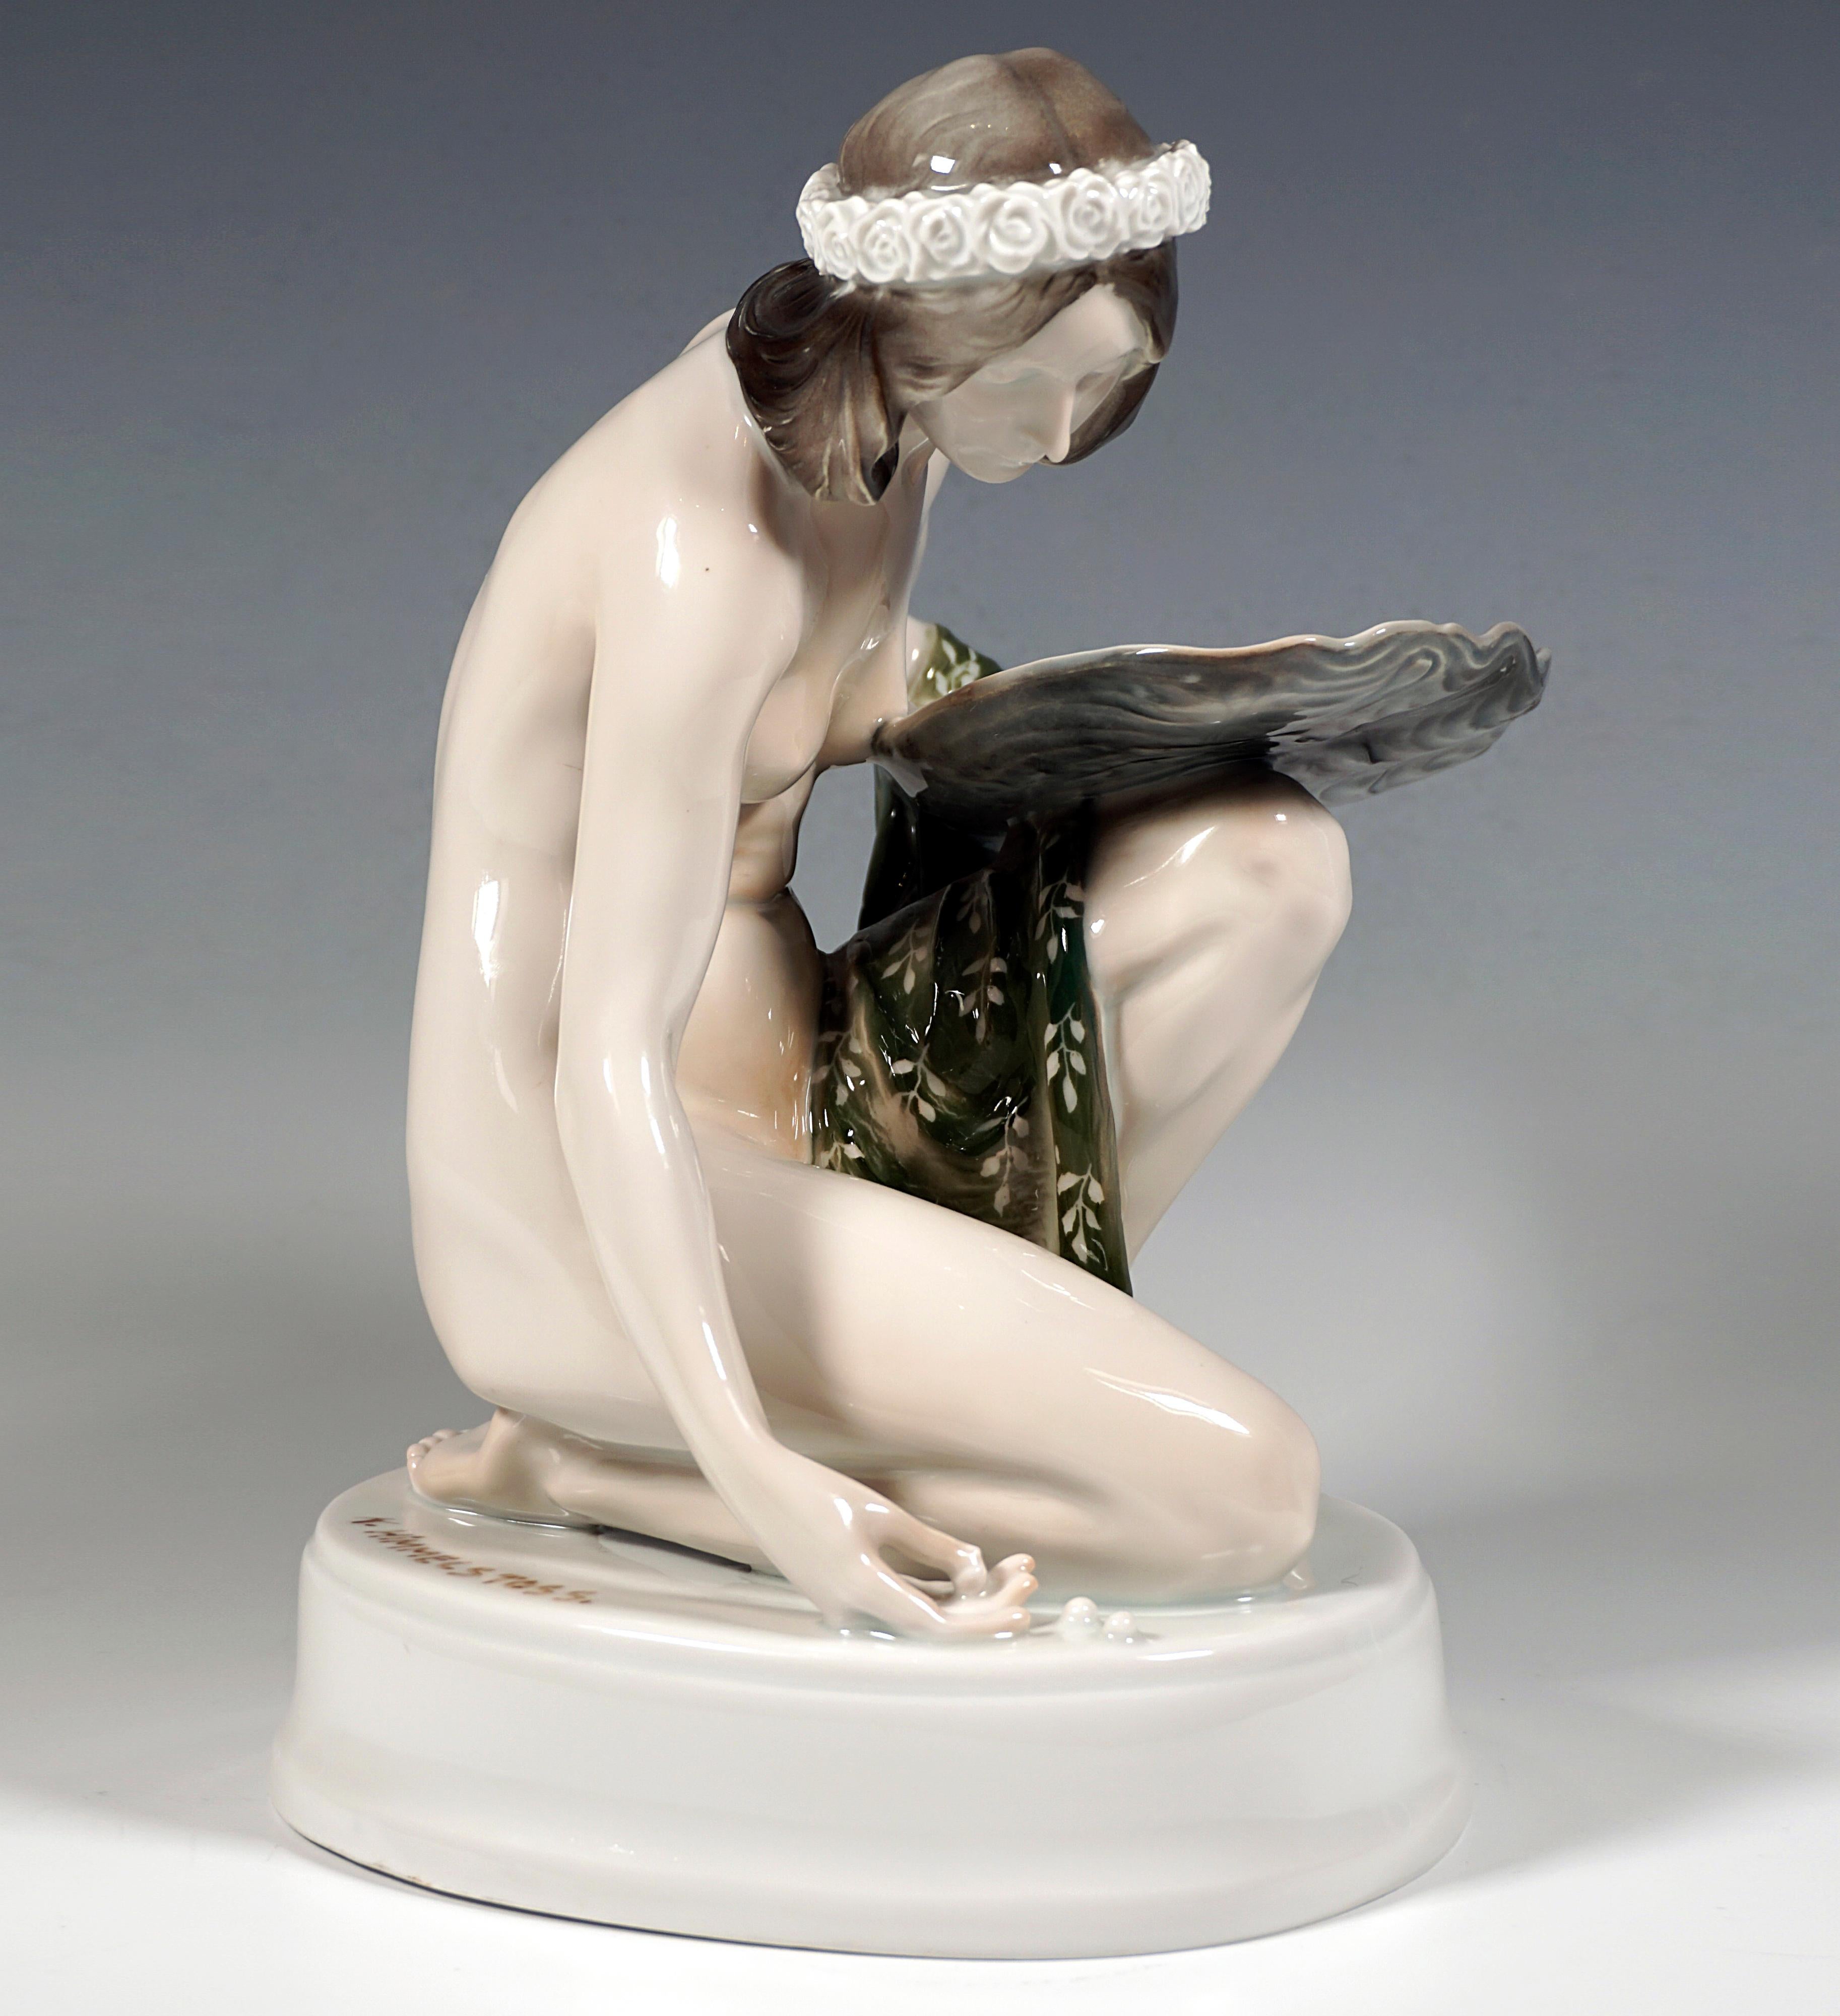 Excellent Rosenthal figurine of the 1920s:
Unclothed girl with a wreath of flowers on her shoulder-length hair parted in the middle, kneeling on the ground with her right leg and picking up pearls from the ground in a bent posture, balancing a large